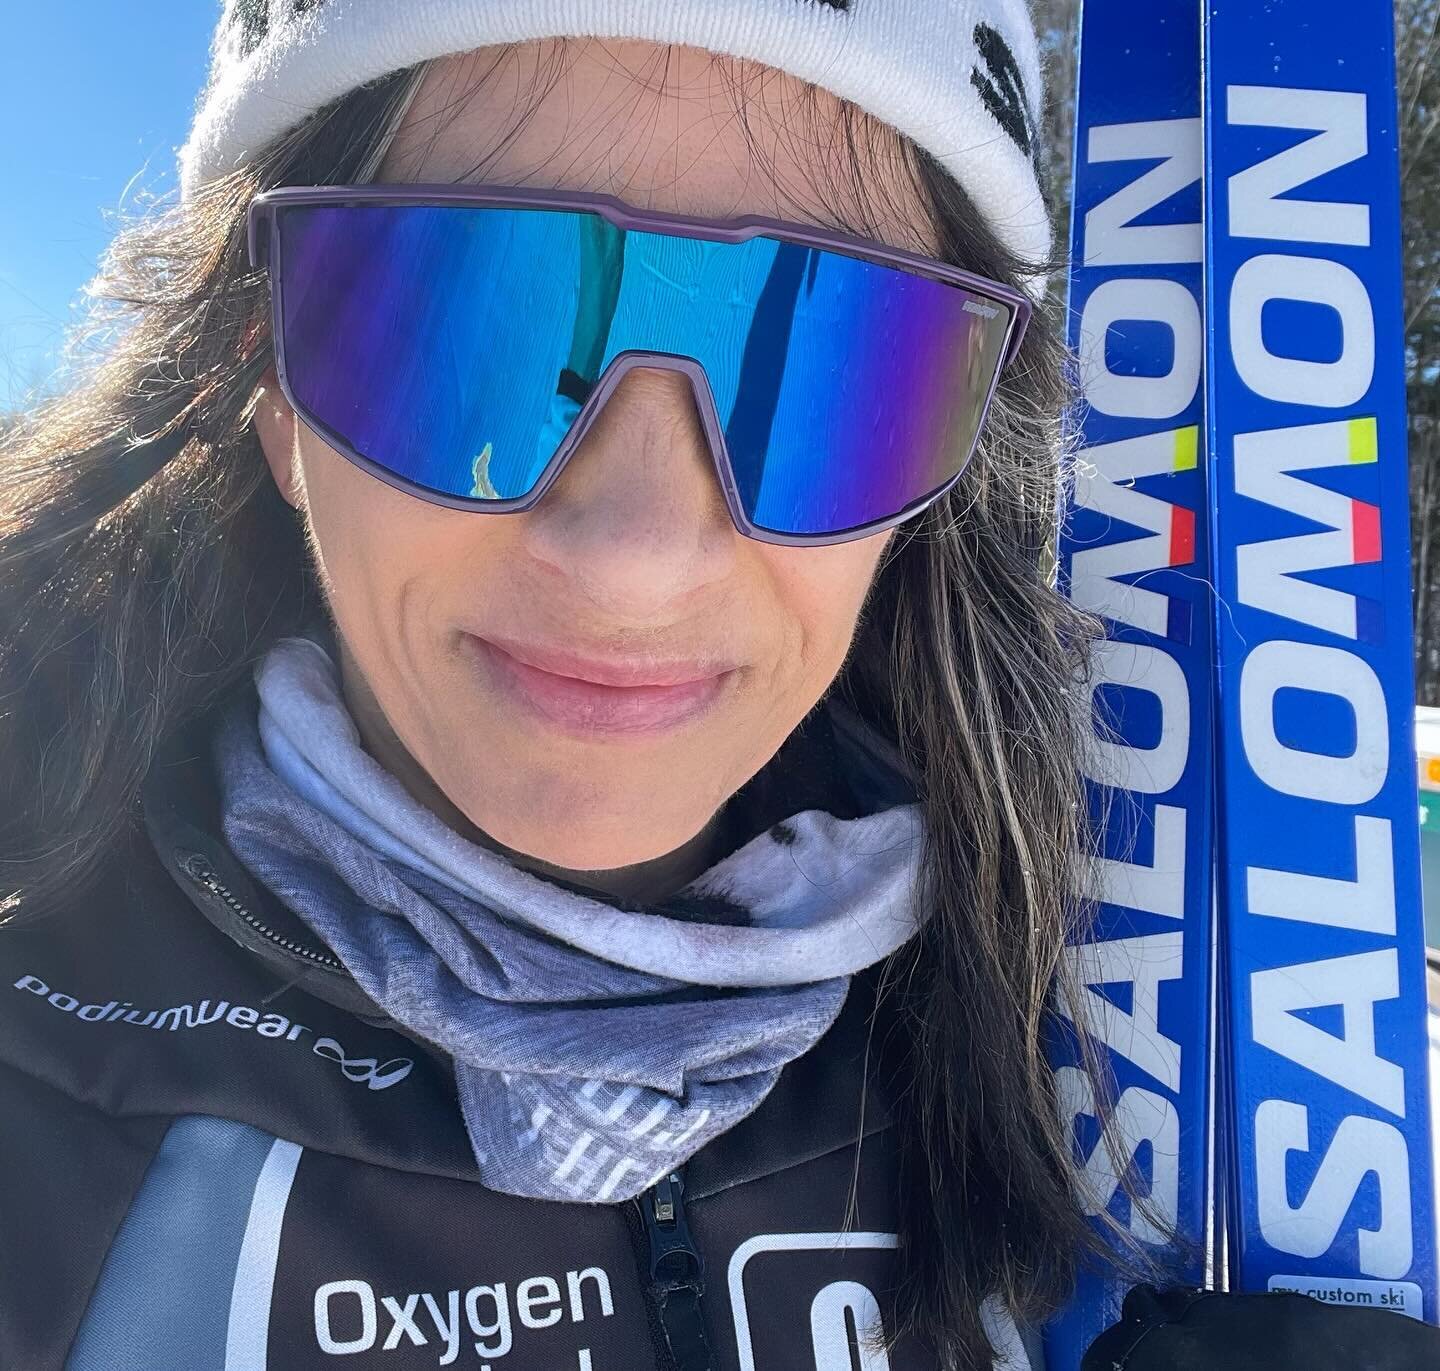 Hard days feel good. Especially when the snow is 👌🏻, the ☀️ is shining and your equipment is the best 🏆 💙. 
#nordicskiing #xcskiing #xcskiracing #bestskis #bestshades #raceprep #xcskiracing #equipmentmatters #loveyourskis #salomonwmn #salomonnord